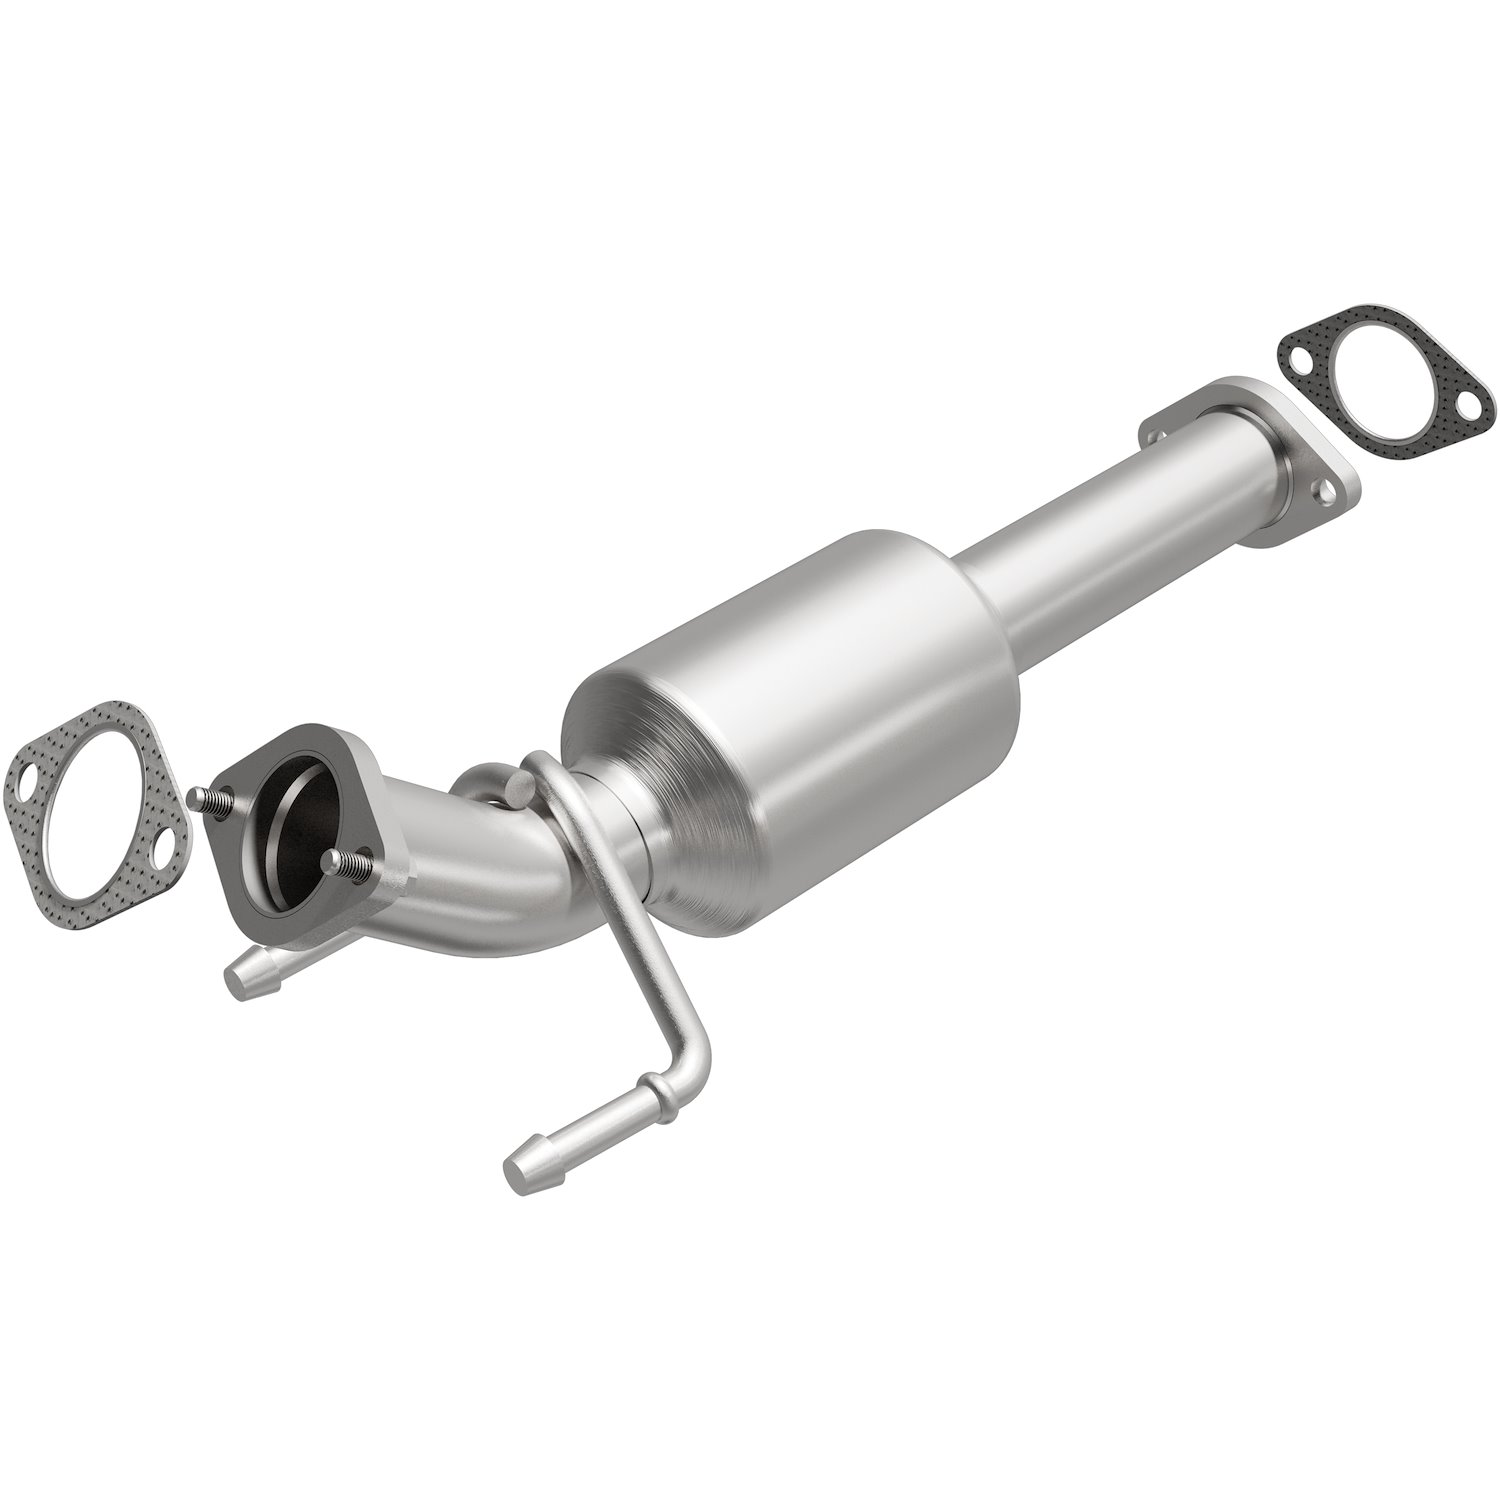 2012-2015 Chevrolet Sonic California Grade CARB Compliant Direct-Fit Catalytic Converter